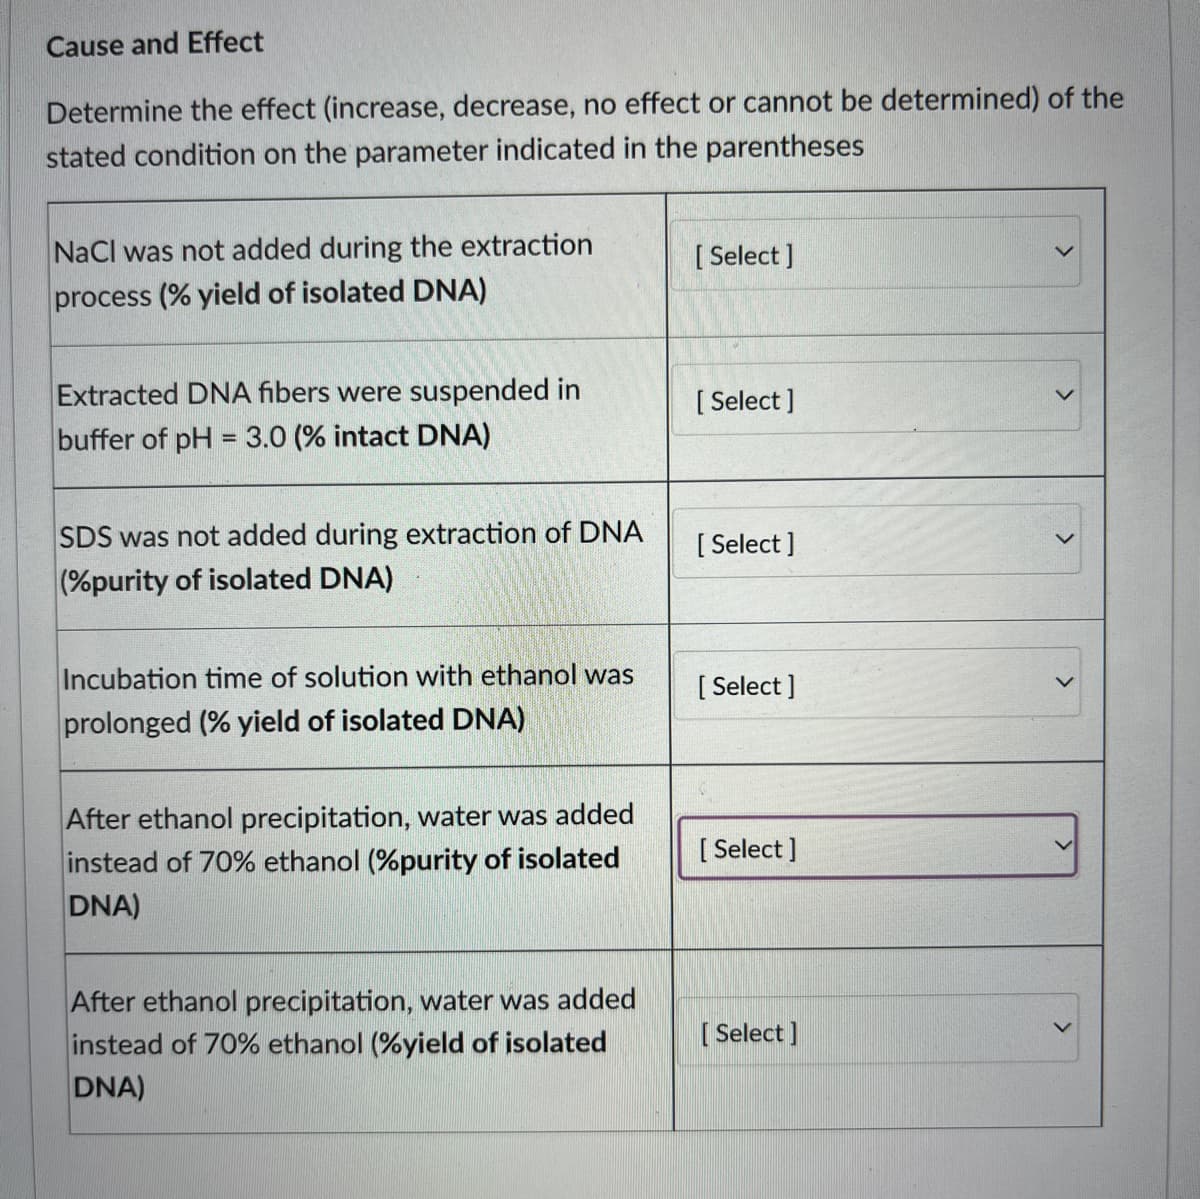 Cause and Effect
Determine the effect (increase, decrease, no effect or cannot be determined) of the
stated condition on the parameter indicated in the parentheses
[Select]
NaCl was not added during the extraction
process (% yield of isolated DNA)
Extracted DNA fibers were suspended in
buffer of pH = 3.0 (% intact DNA)
[Select]
SDS was not added during extraction of DNA
(%purity of isolated DNA)
[Select]
Incubation time of solution with ethanol was
prolonged (% yield of isolated DNA)
[Select]
After ethanol precipitation, water was added
instead of 70% ethanol (%purity of isolated
DNA)
[Select]
After ethanol precipitation, water was added
instead of 70% ethanol (%yield of isolated
DNA)
[Select]